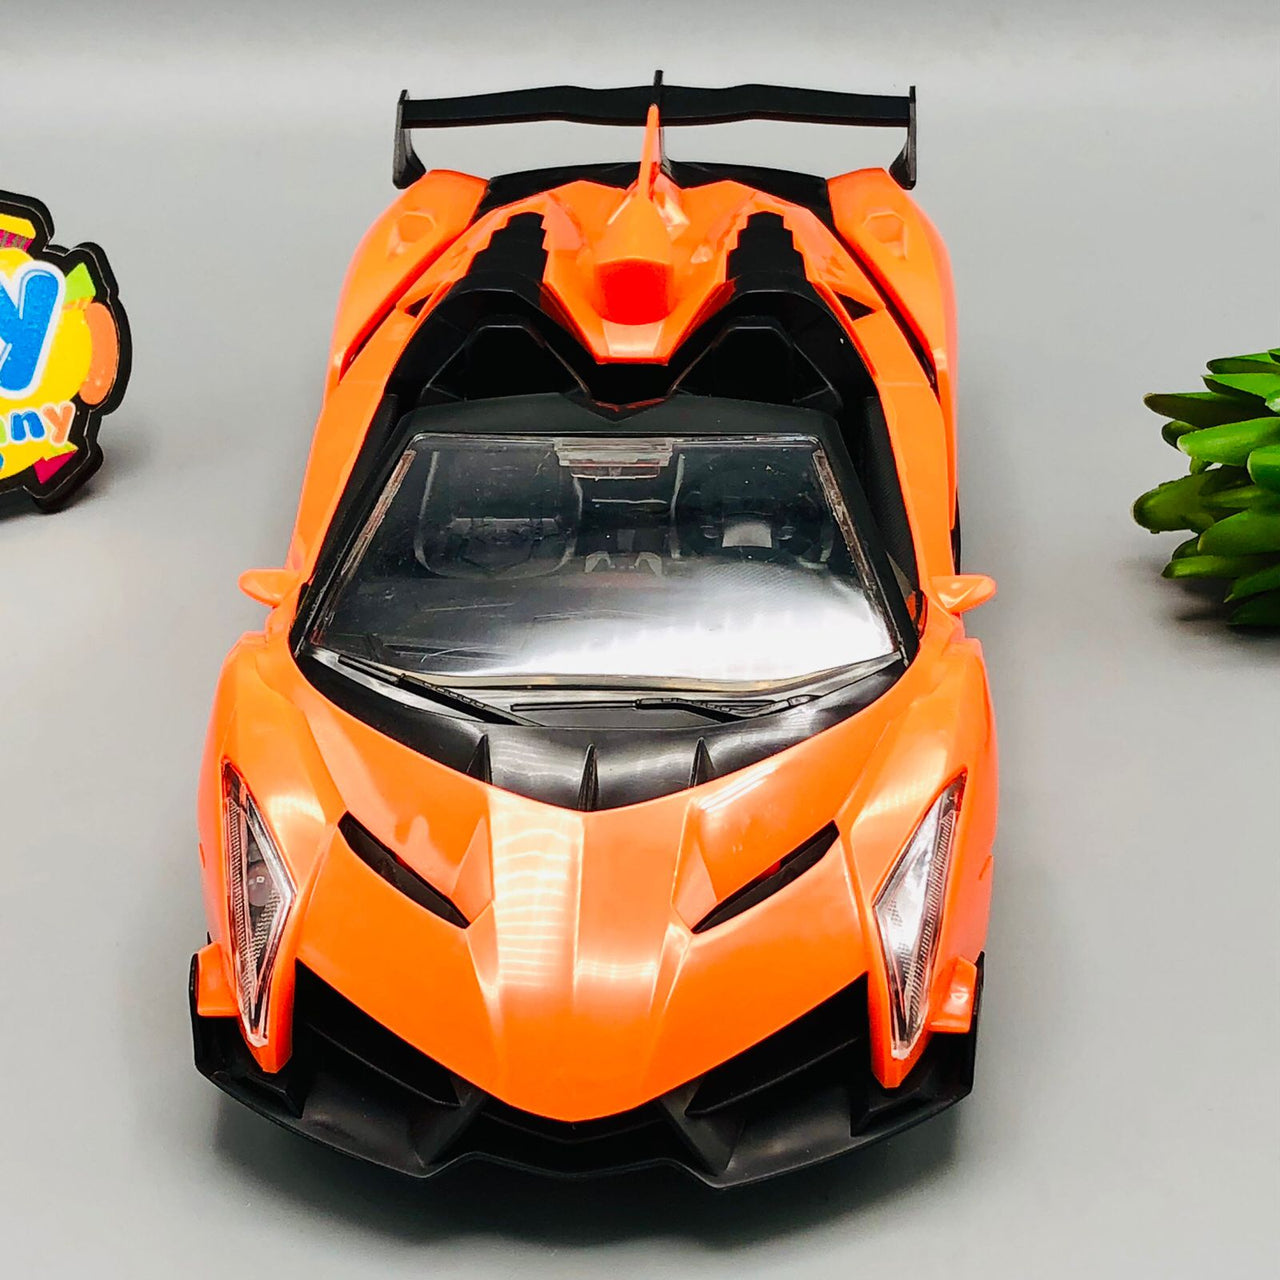 27MHz 1:16 RC Racing Car - Open Roof